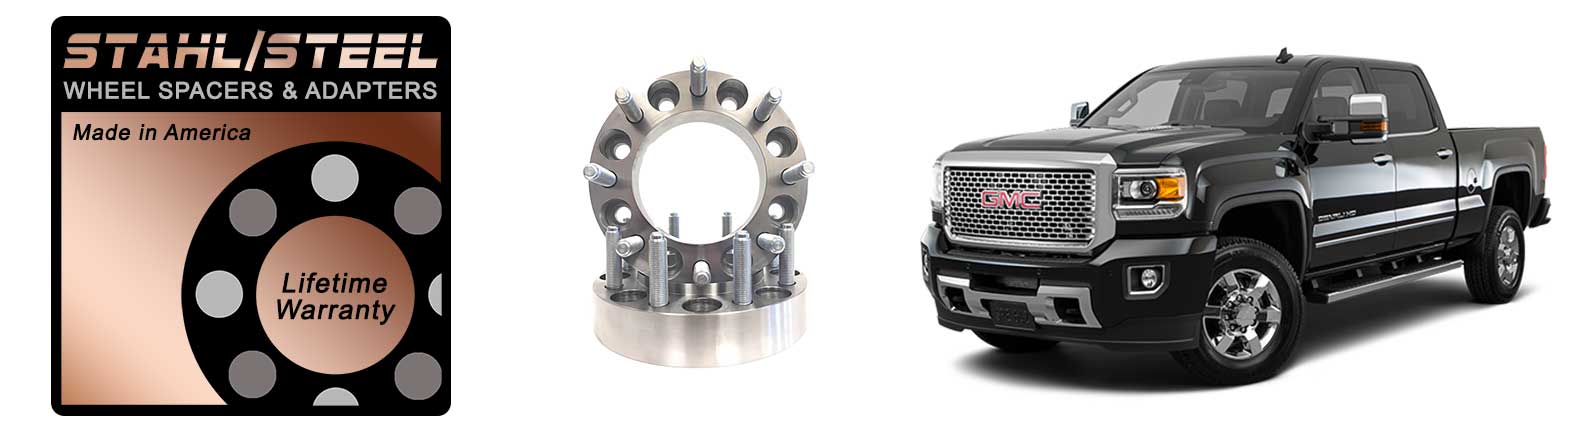 gmc spacers